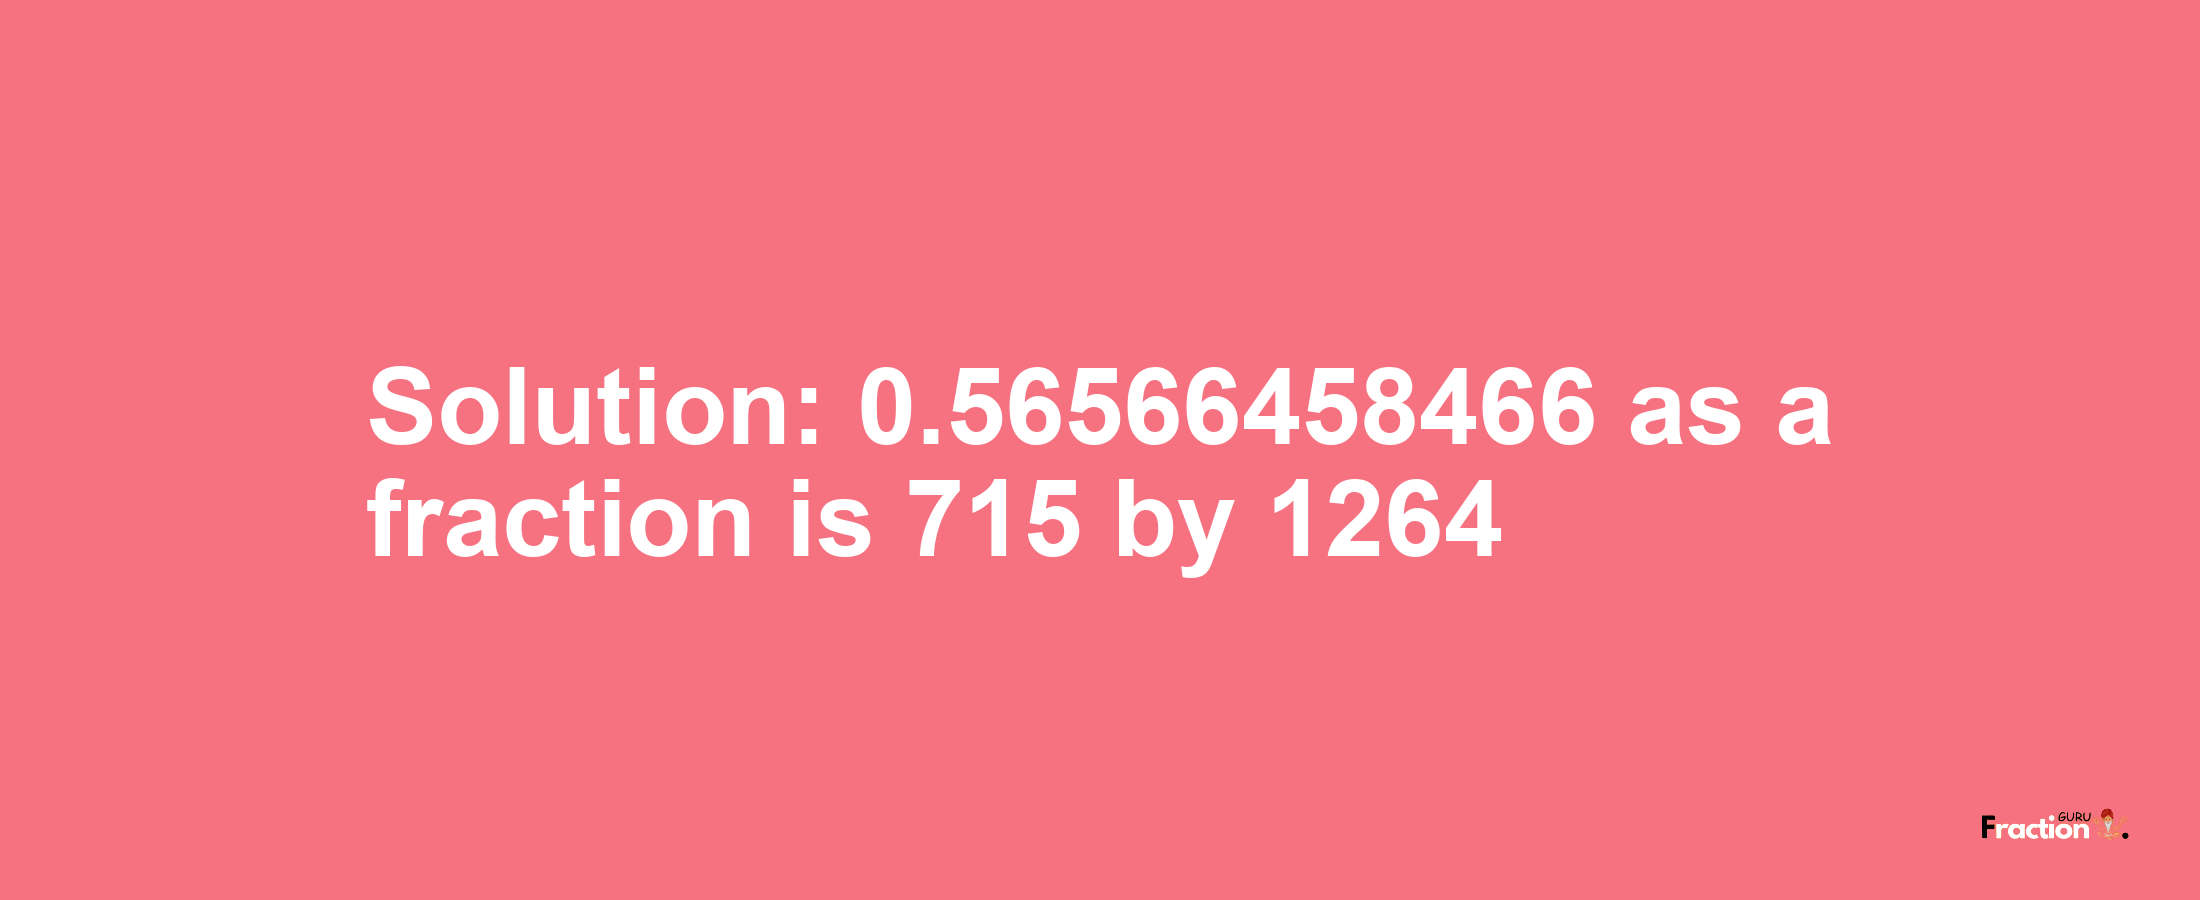 Solution:0.56566458466 as a fraction is 715/1264